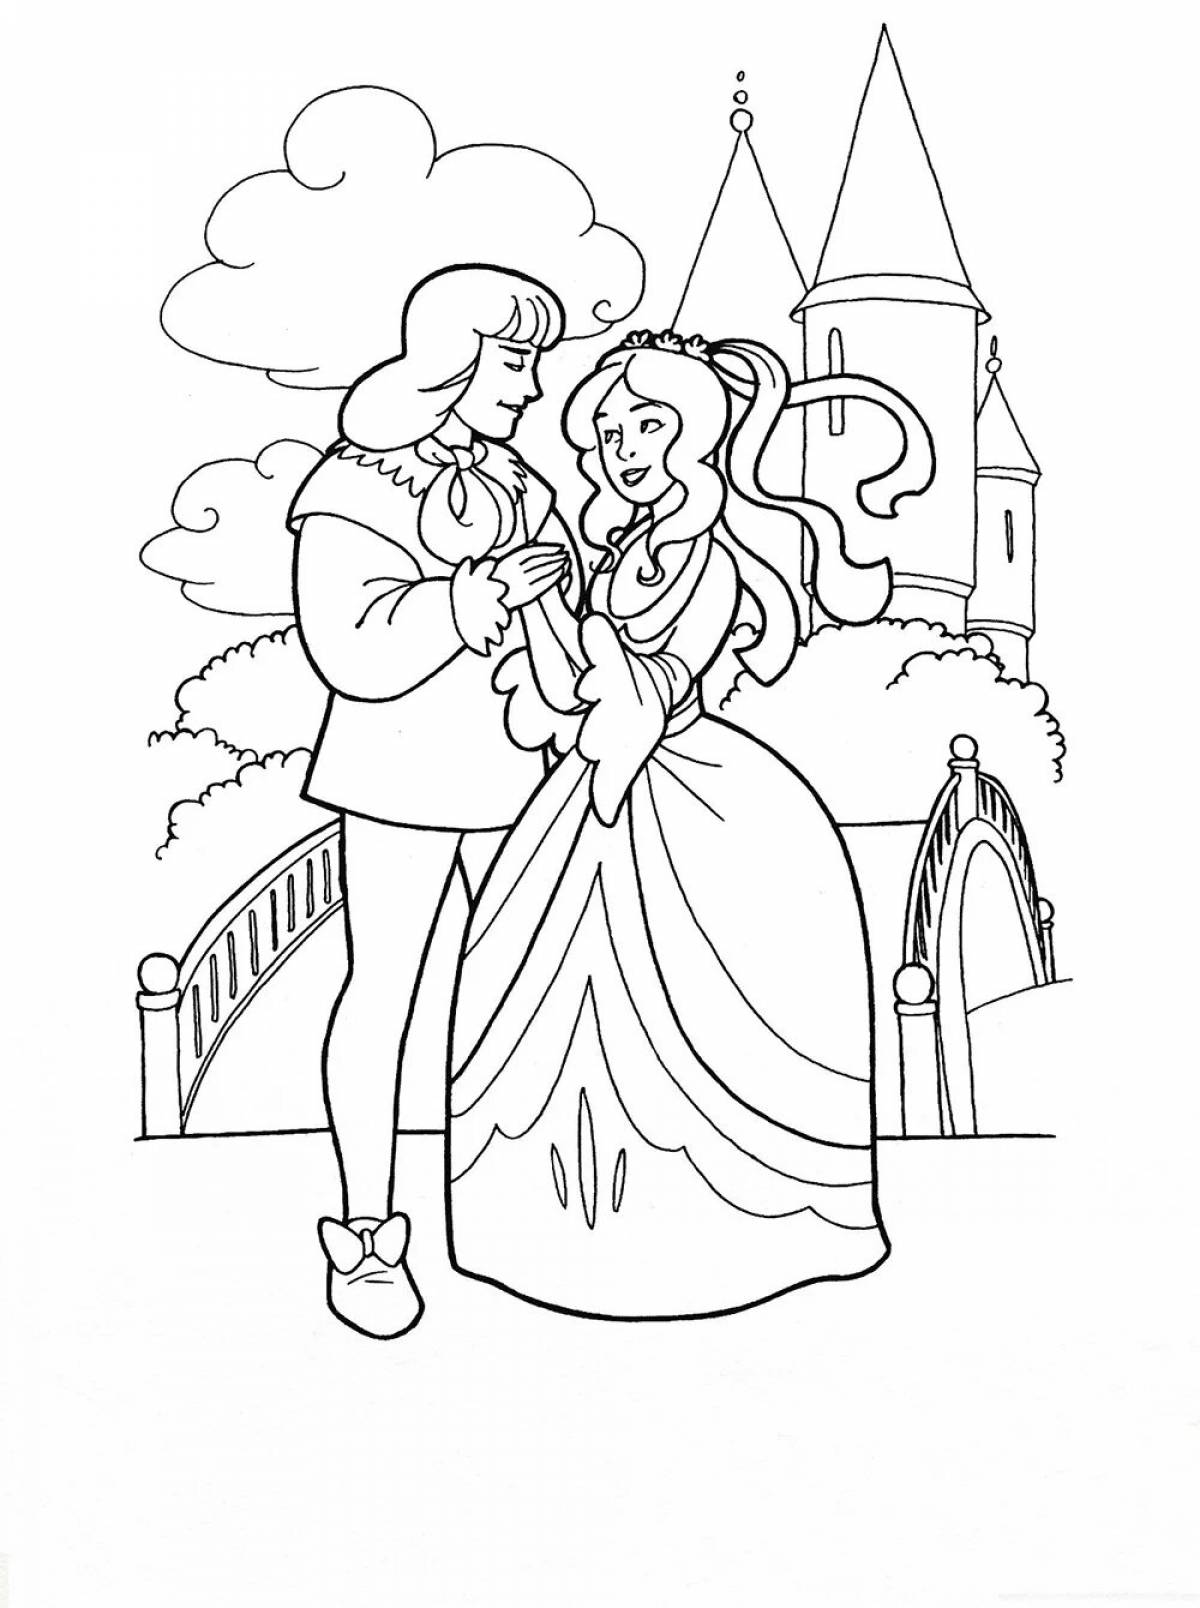 Coloring page blessed cinderella